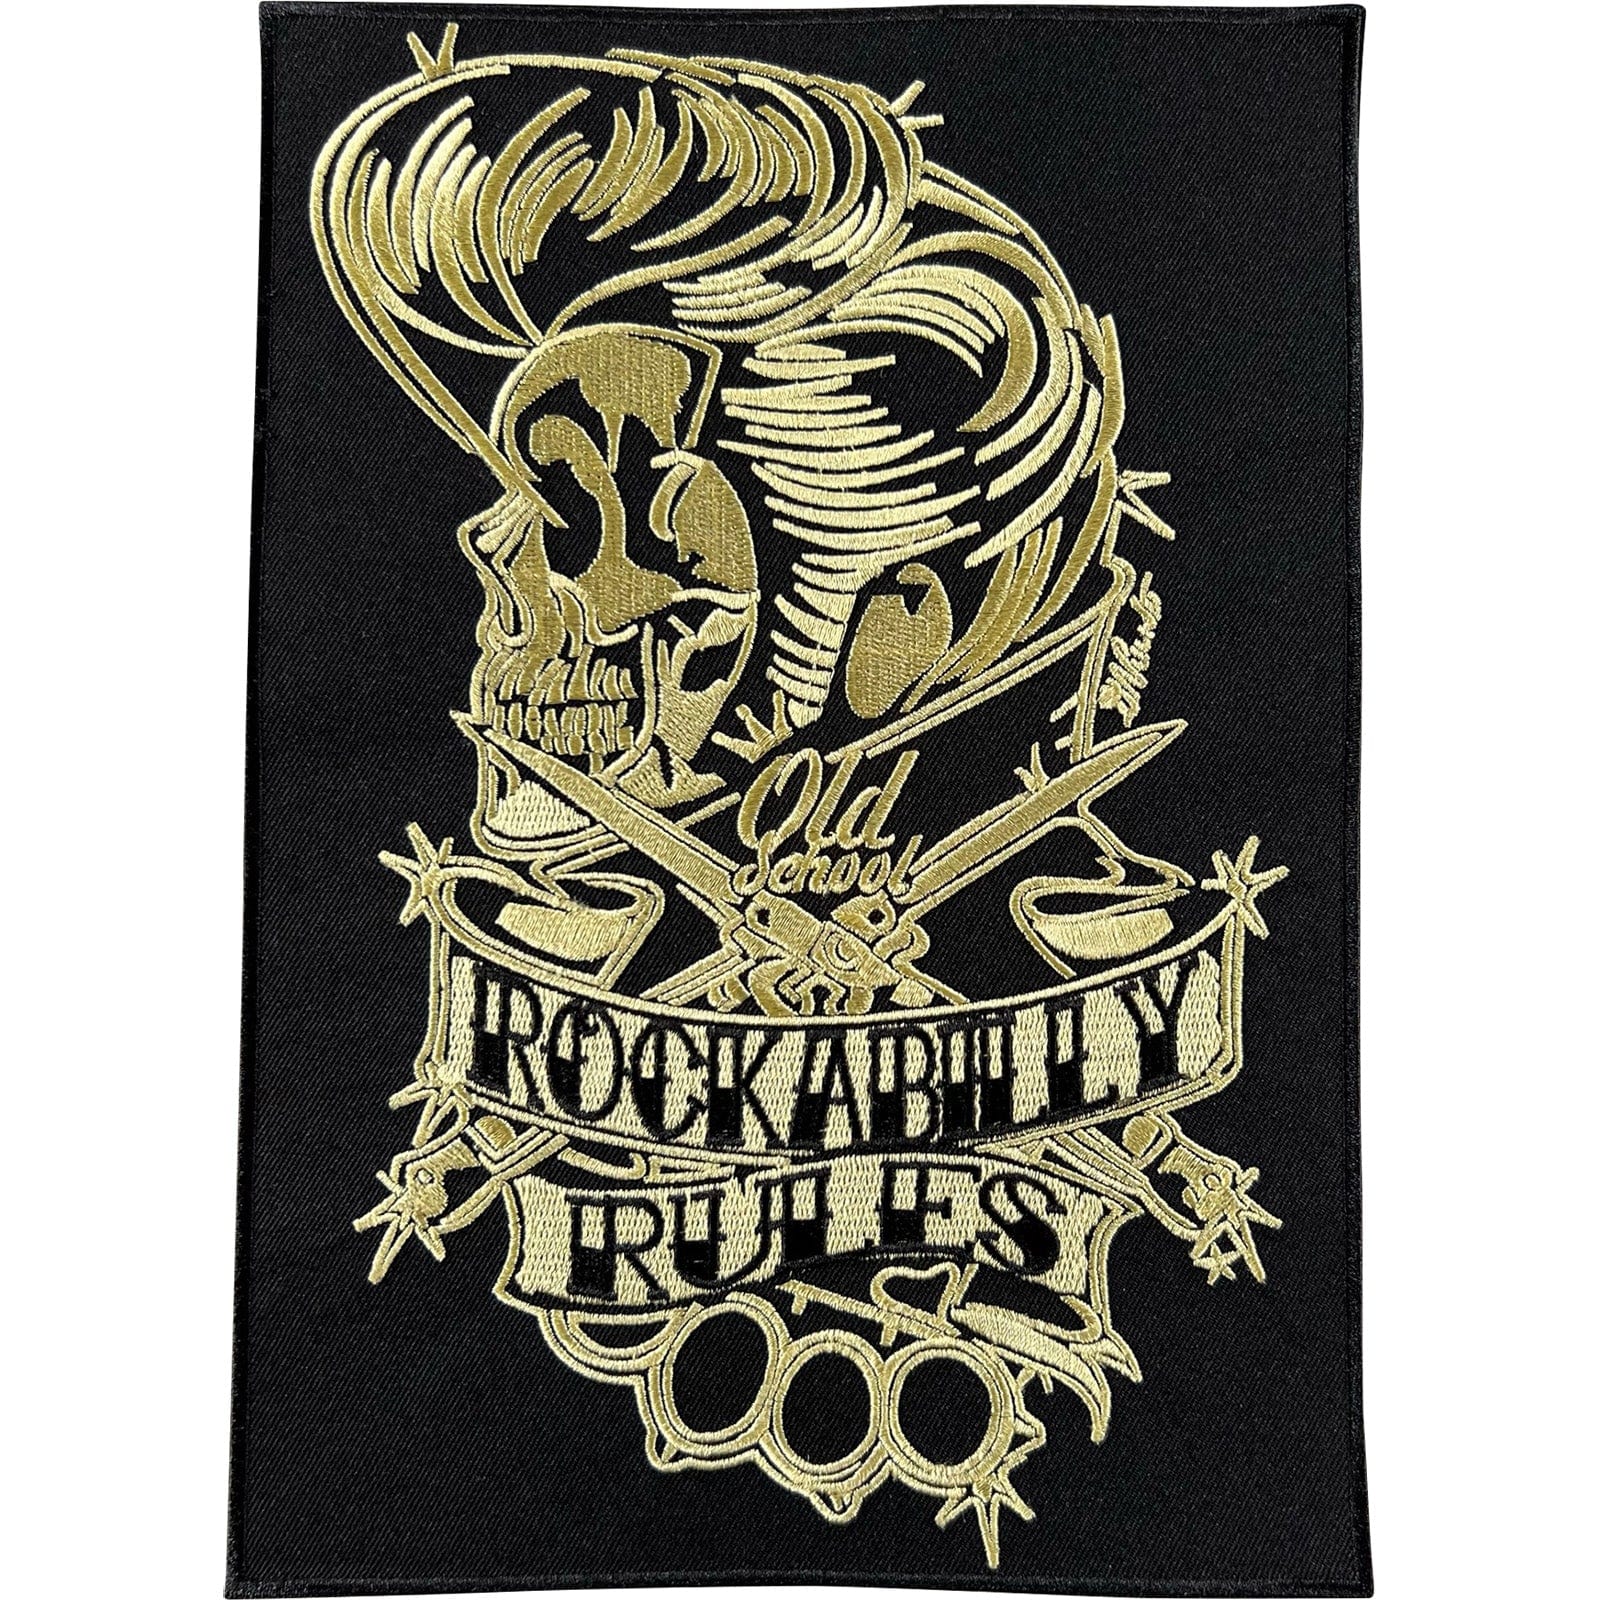 Large Rockabilly Rules Old School Patch Iron On Big Rock Music Embroidered Badge